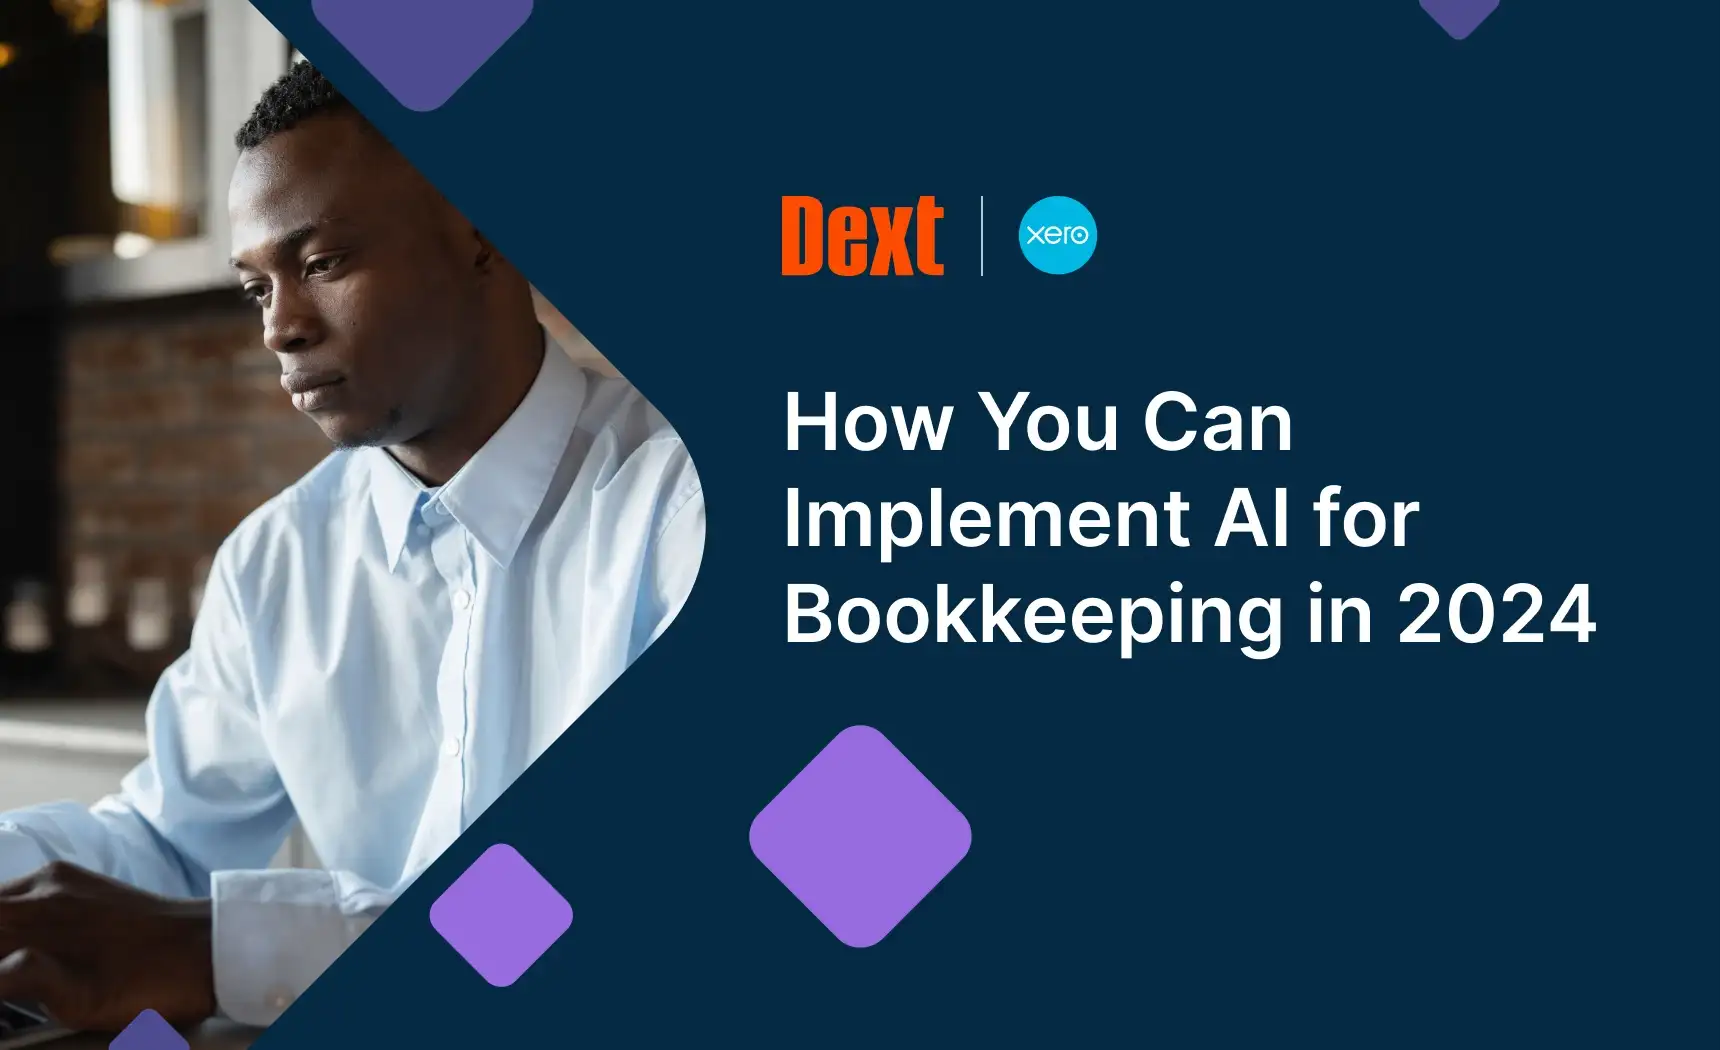 Dext: How You Can Implement AI for Bookkeeping in 2024 image